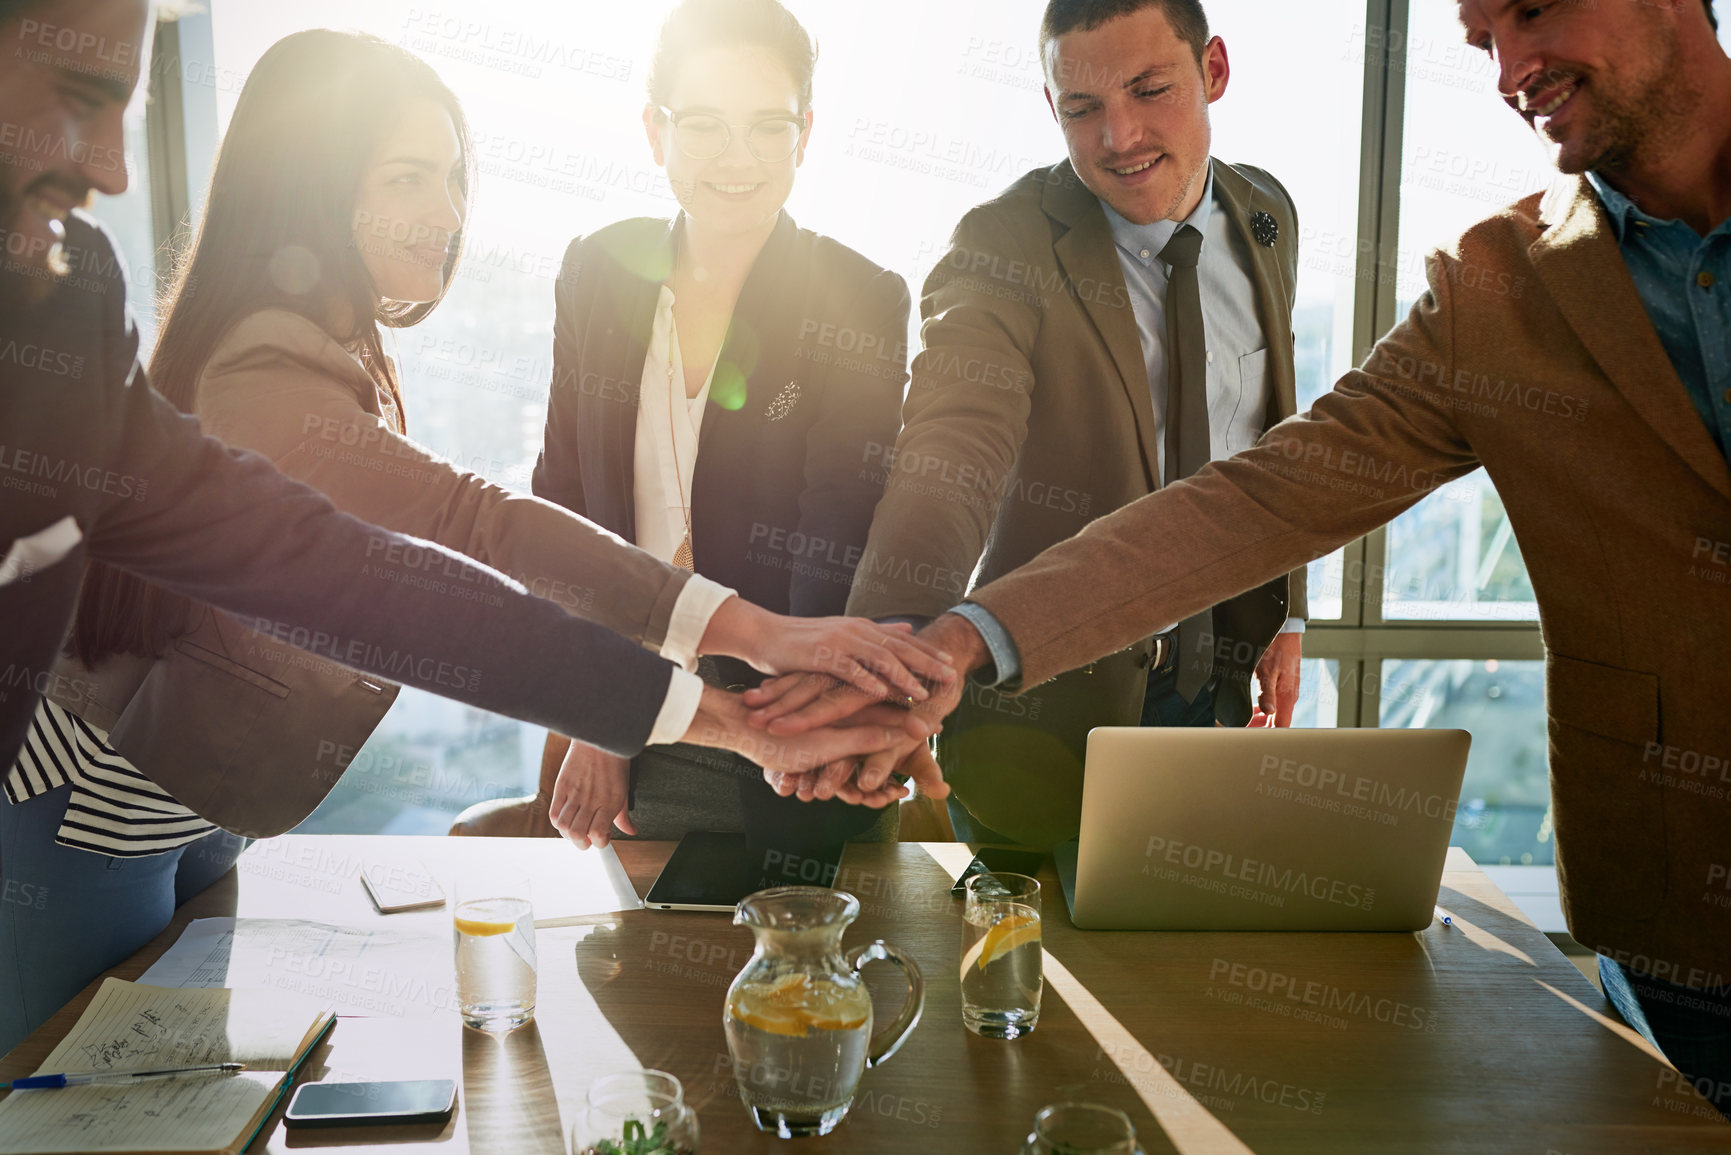 Buy stock photo Cropped shot of a group of businesspeople with their hands in a huddle